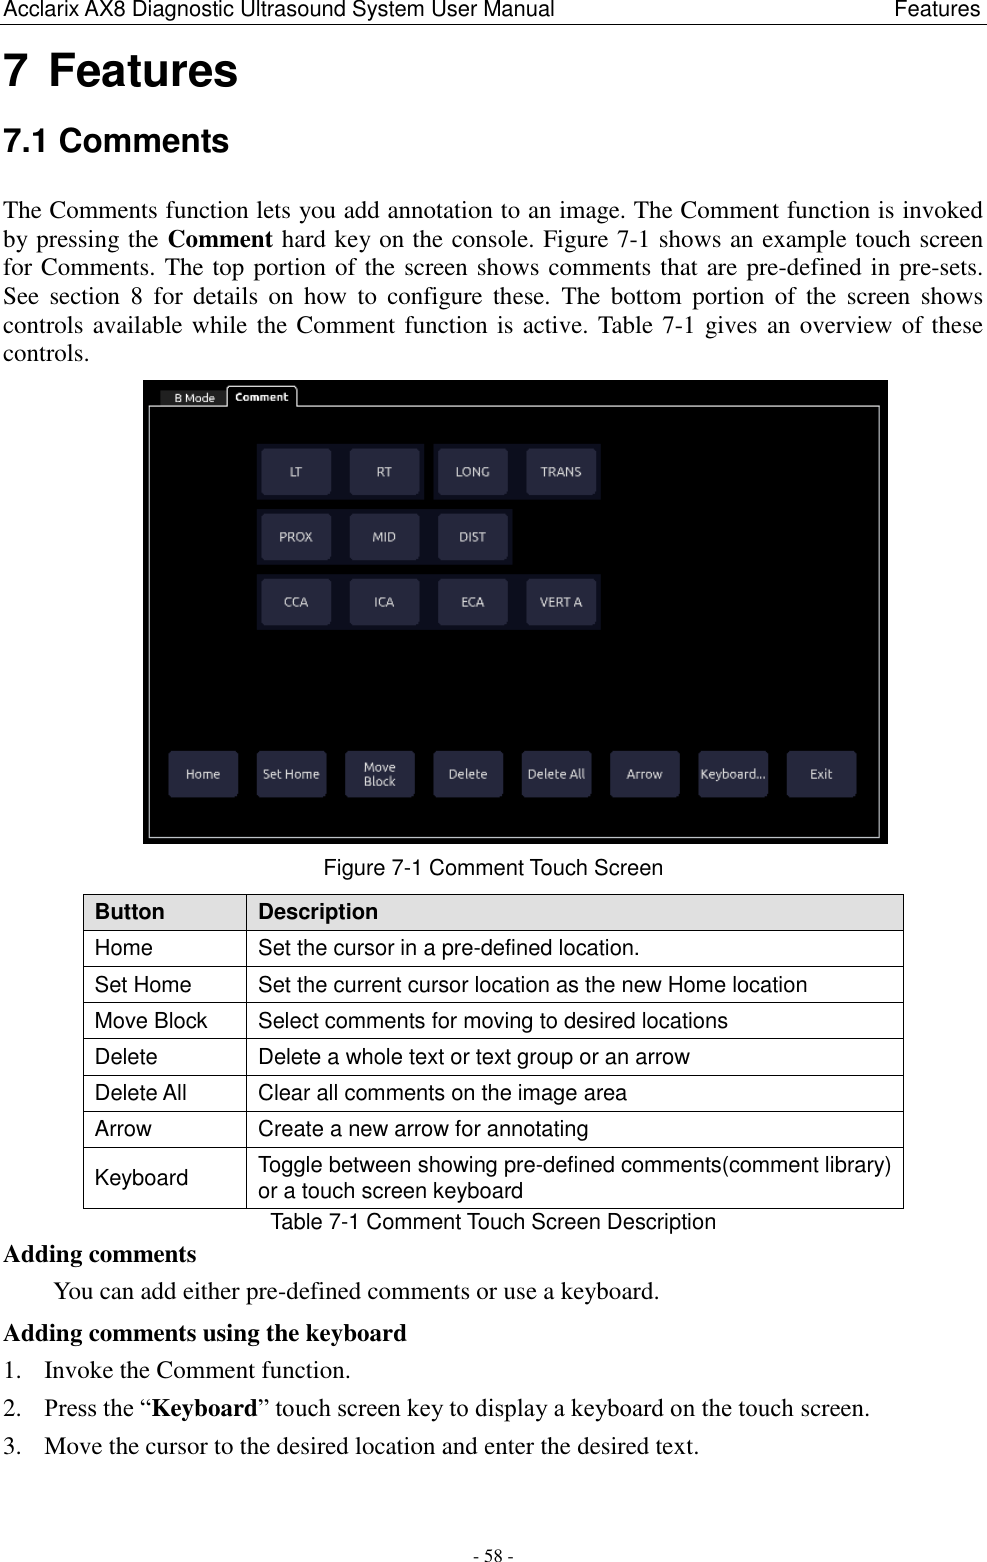 Acclarix AX8 Diagnostic Ultrasound System User Manual                                                              Features - 58 - 7 Features 7.1 Comments The Comments function lets you add annotation to an image. The Comment function is invoked by pressing the Comment hard key on the console. Figure 7-1 shows an example touch screen for Comments. The top portion of the screen shows comments that are pre-defined in pre-sets. See  section  8  for  details  on  how  to  configure these.  The  bottom  portion  of  the  screen  shows controls available while the Comment function is active. Table 7-1 gives an overview of these controls.  Figure 7-1 Comment Touch Screen Button Description Home Set the cursor in a pre-defined location.   Set Home Set the current cursor location as the new Home location Move Block Select comments for moving to desired locations Delete Delete a whole text or text group or an arrow Delete All Clear all comments on the image area Arrow Create a new arrow for annotating Keyboard Toggle between showing pre-defined comments(comment library) or a touch screen keyboard Table 7-1 Comment Touch Screen Description Adding comments You can add either pre-defined comments or use a keyboard. Adding comments using the keyboard 1. Invoke the Comment function. 2. Press the “Keyboard” touch screen key to display a keyboard on the touch screen. 3. Move the cursor to the desired location and enter the desired text.  